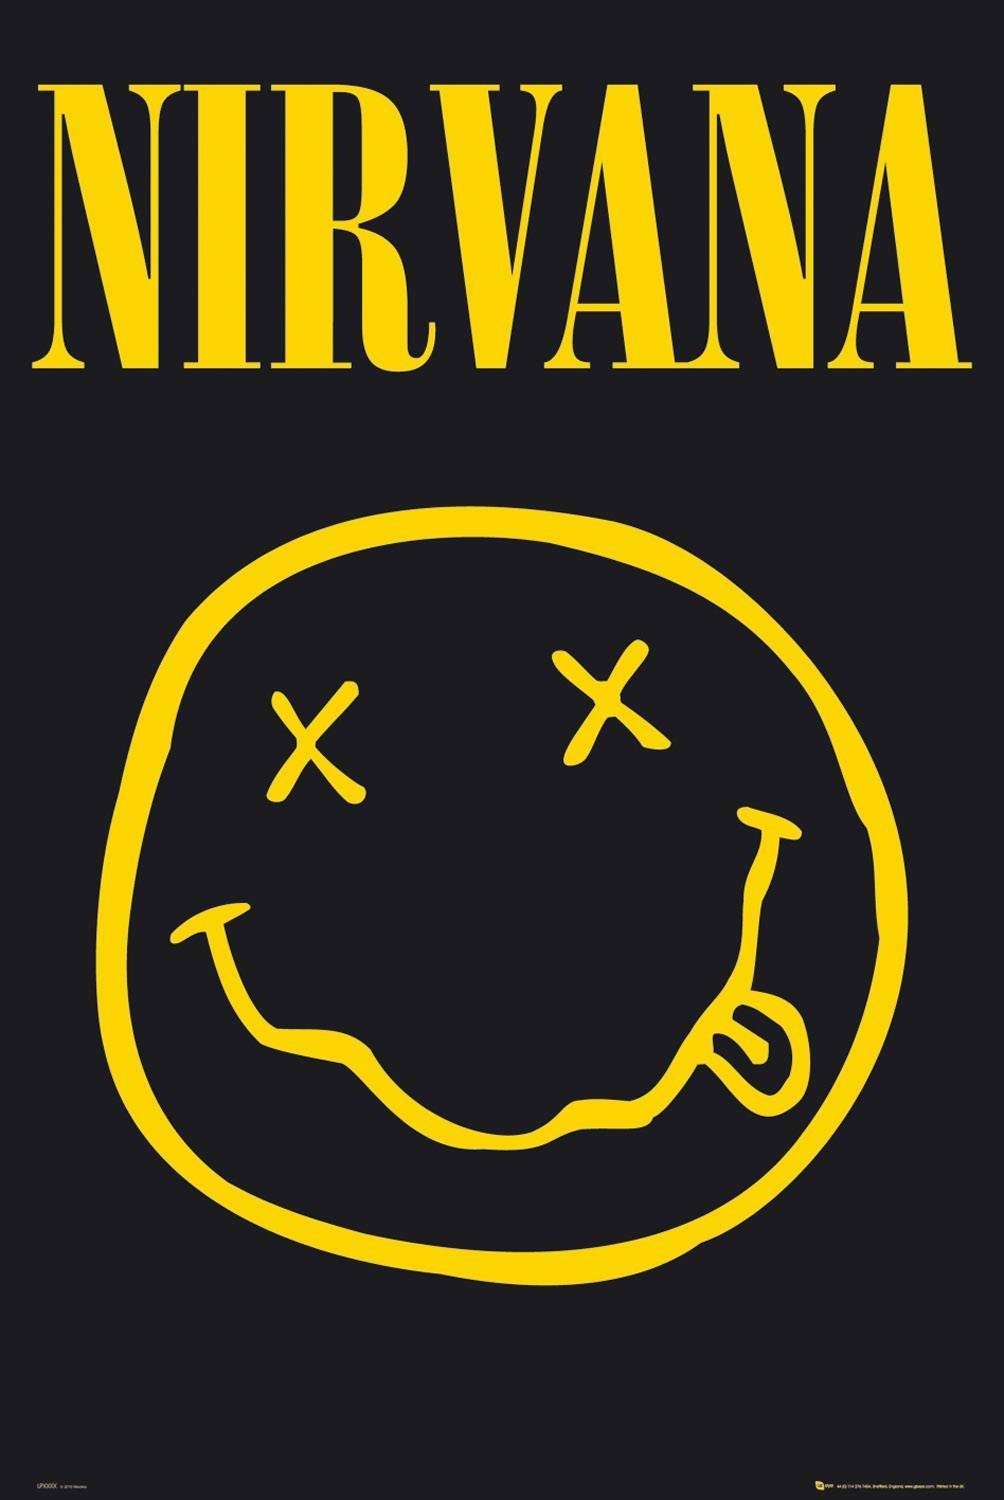 Nirvana Band Musical Poster 13x19 inches